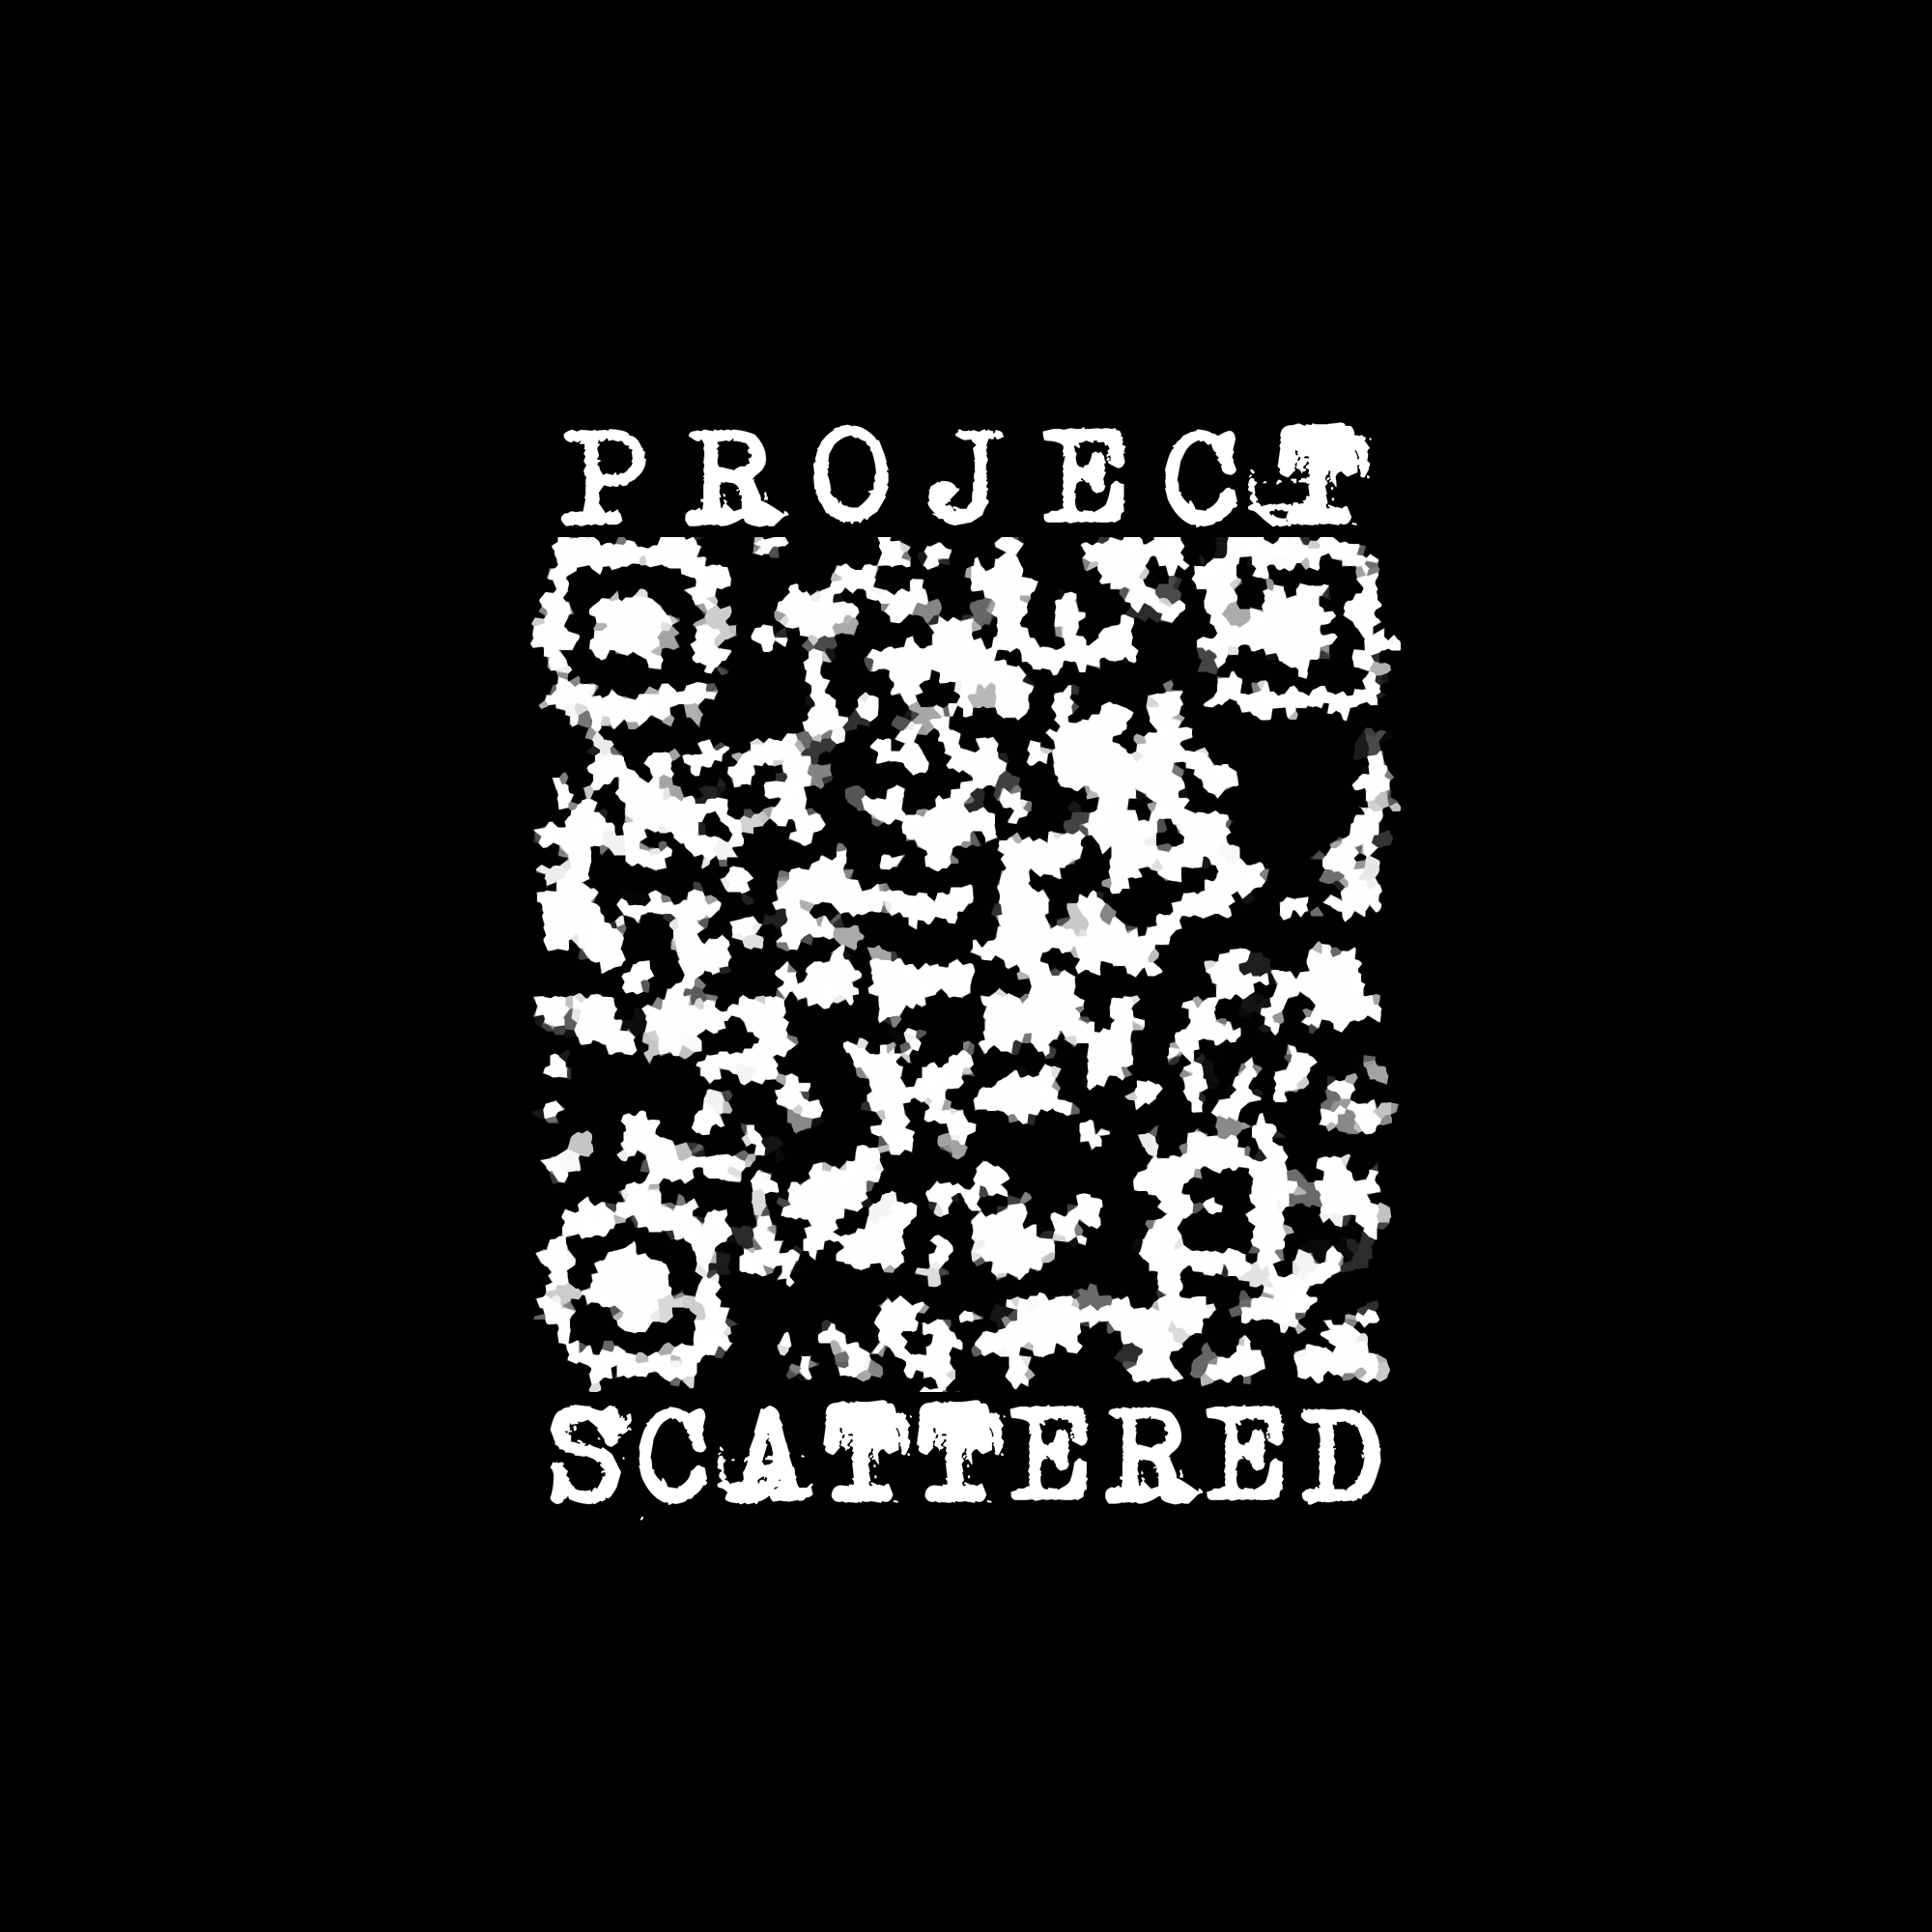 Project Scattered